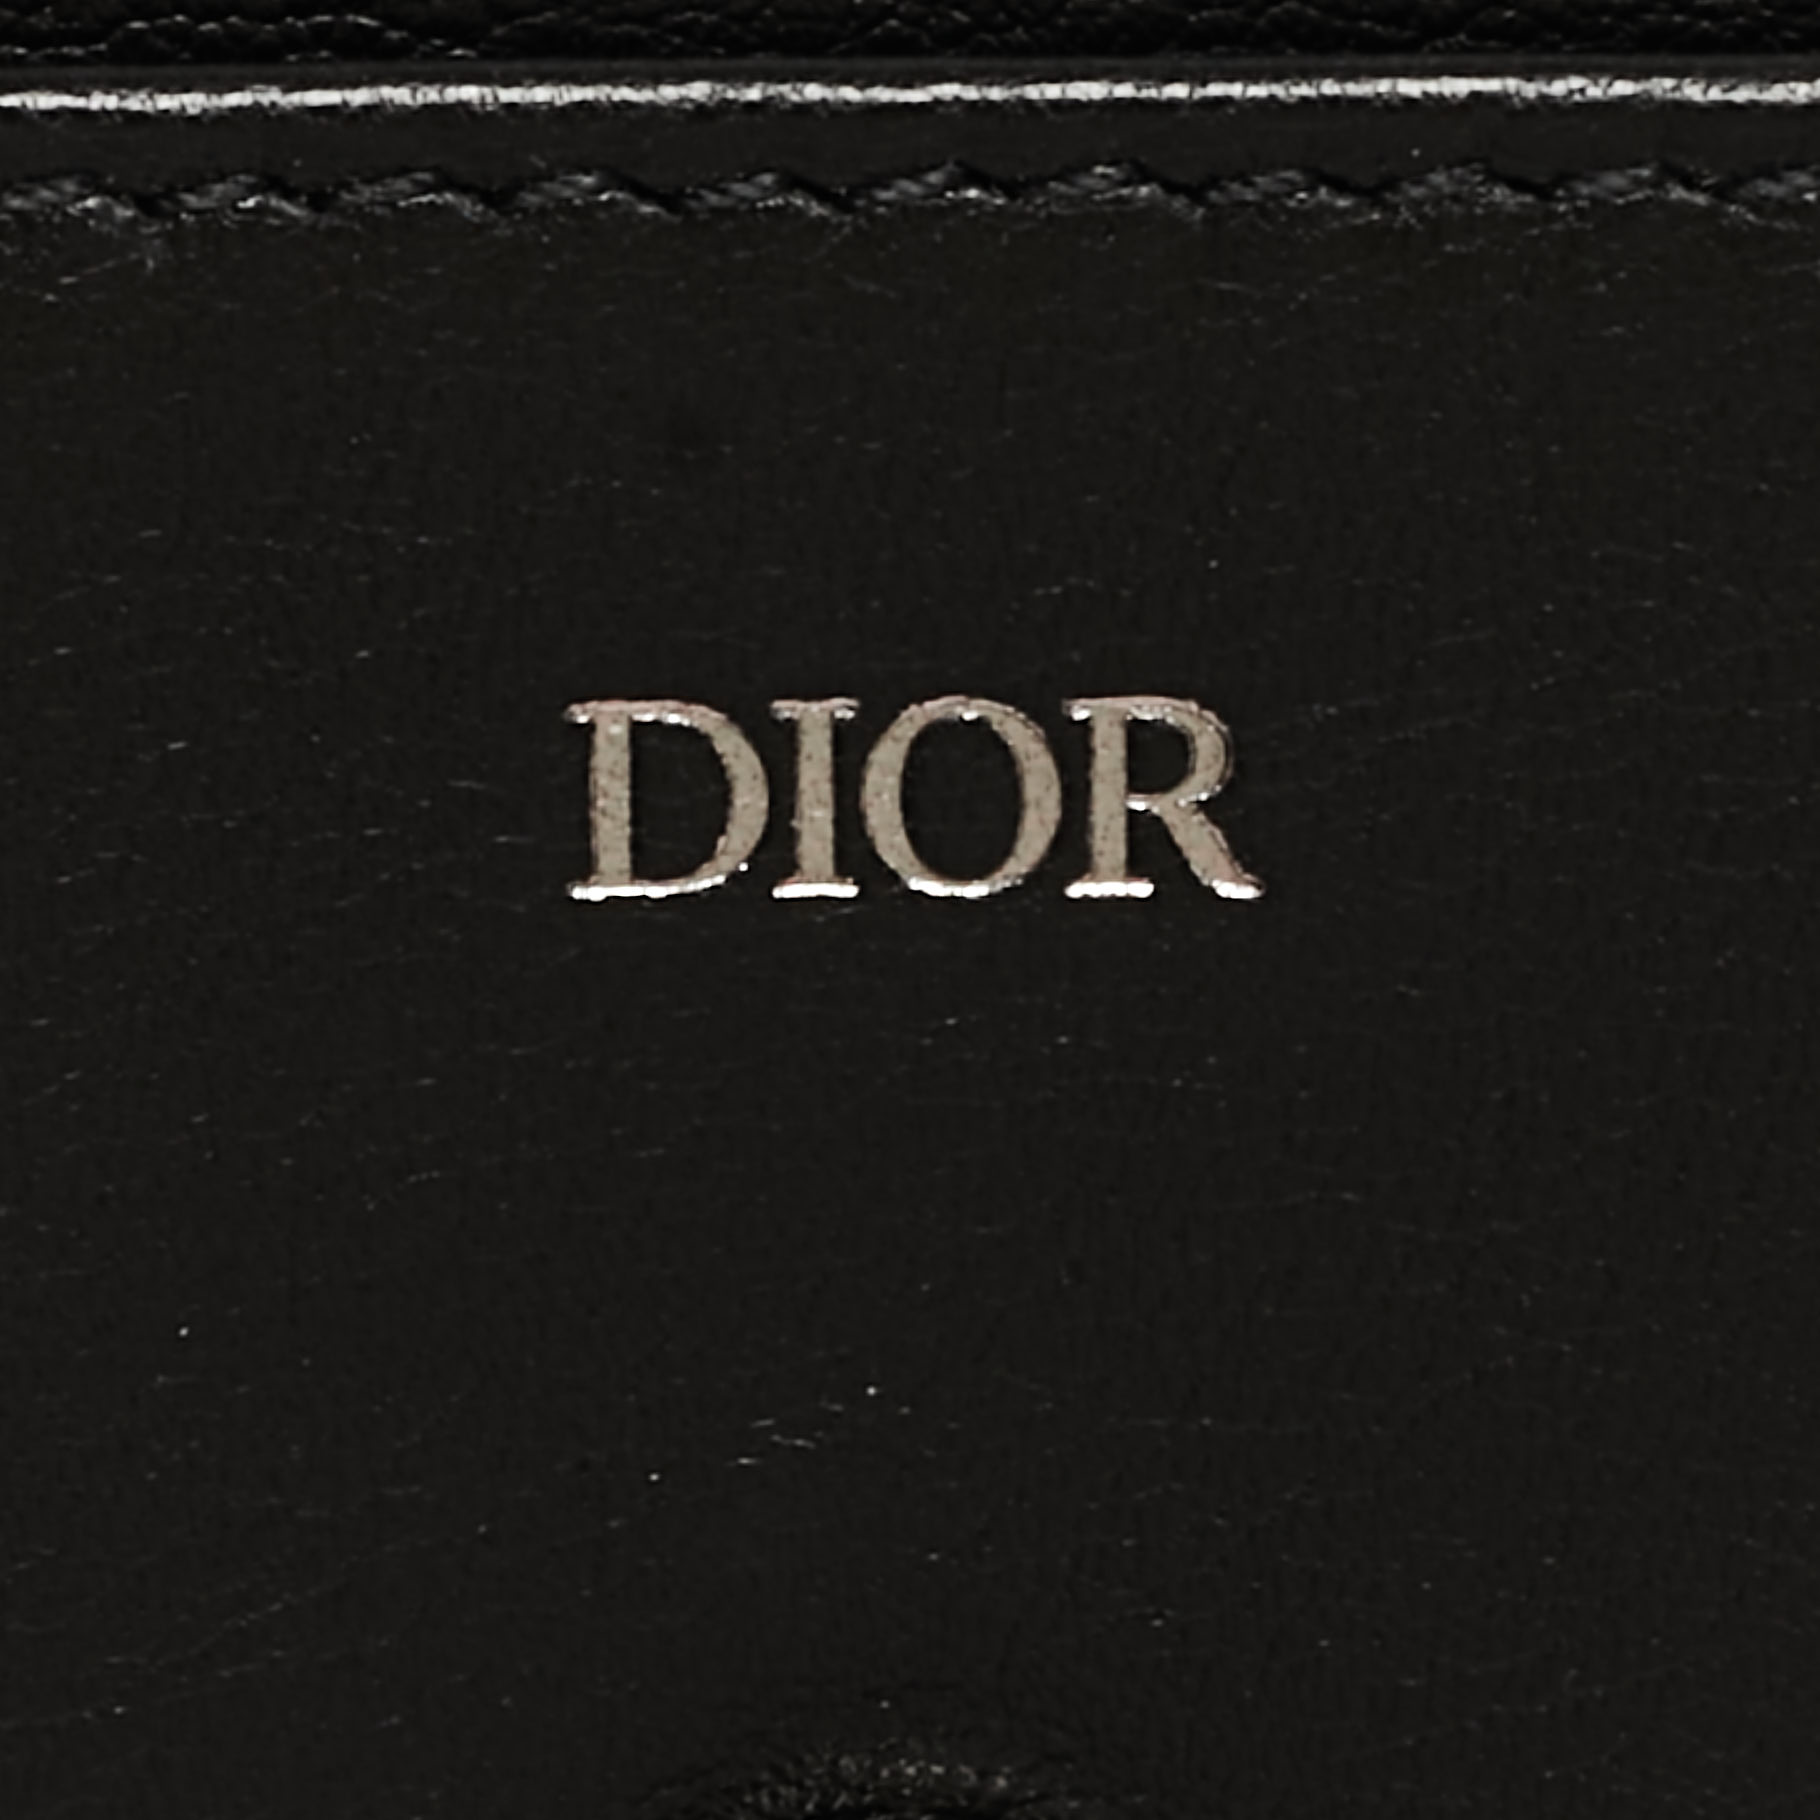 Dior Black Grained Leather Bifold Card Holder